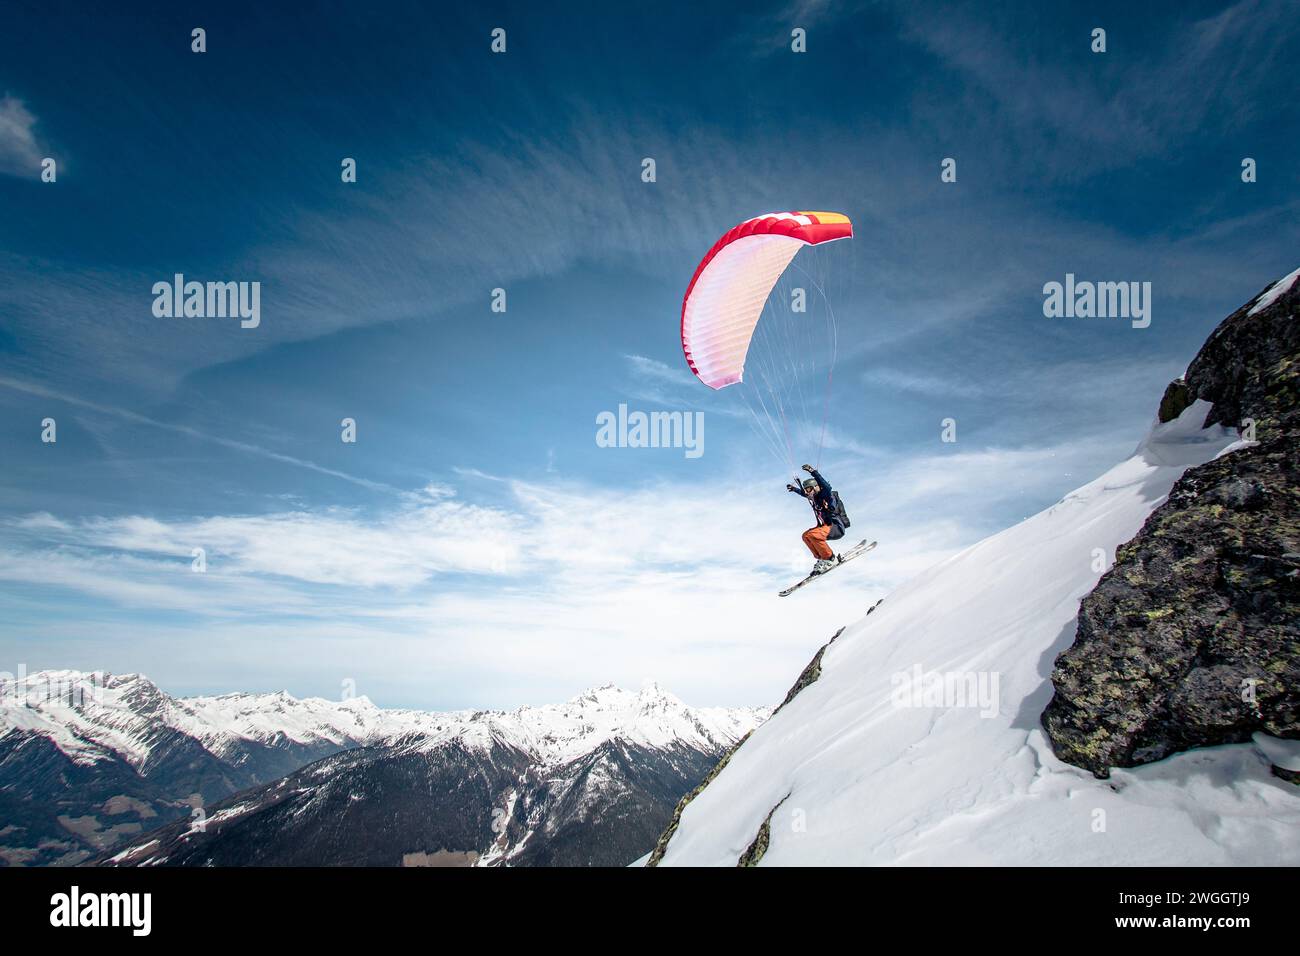 Man speed flying in Alps, Brunico, South Tyrol, Italy Stock Photo